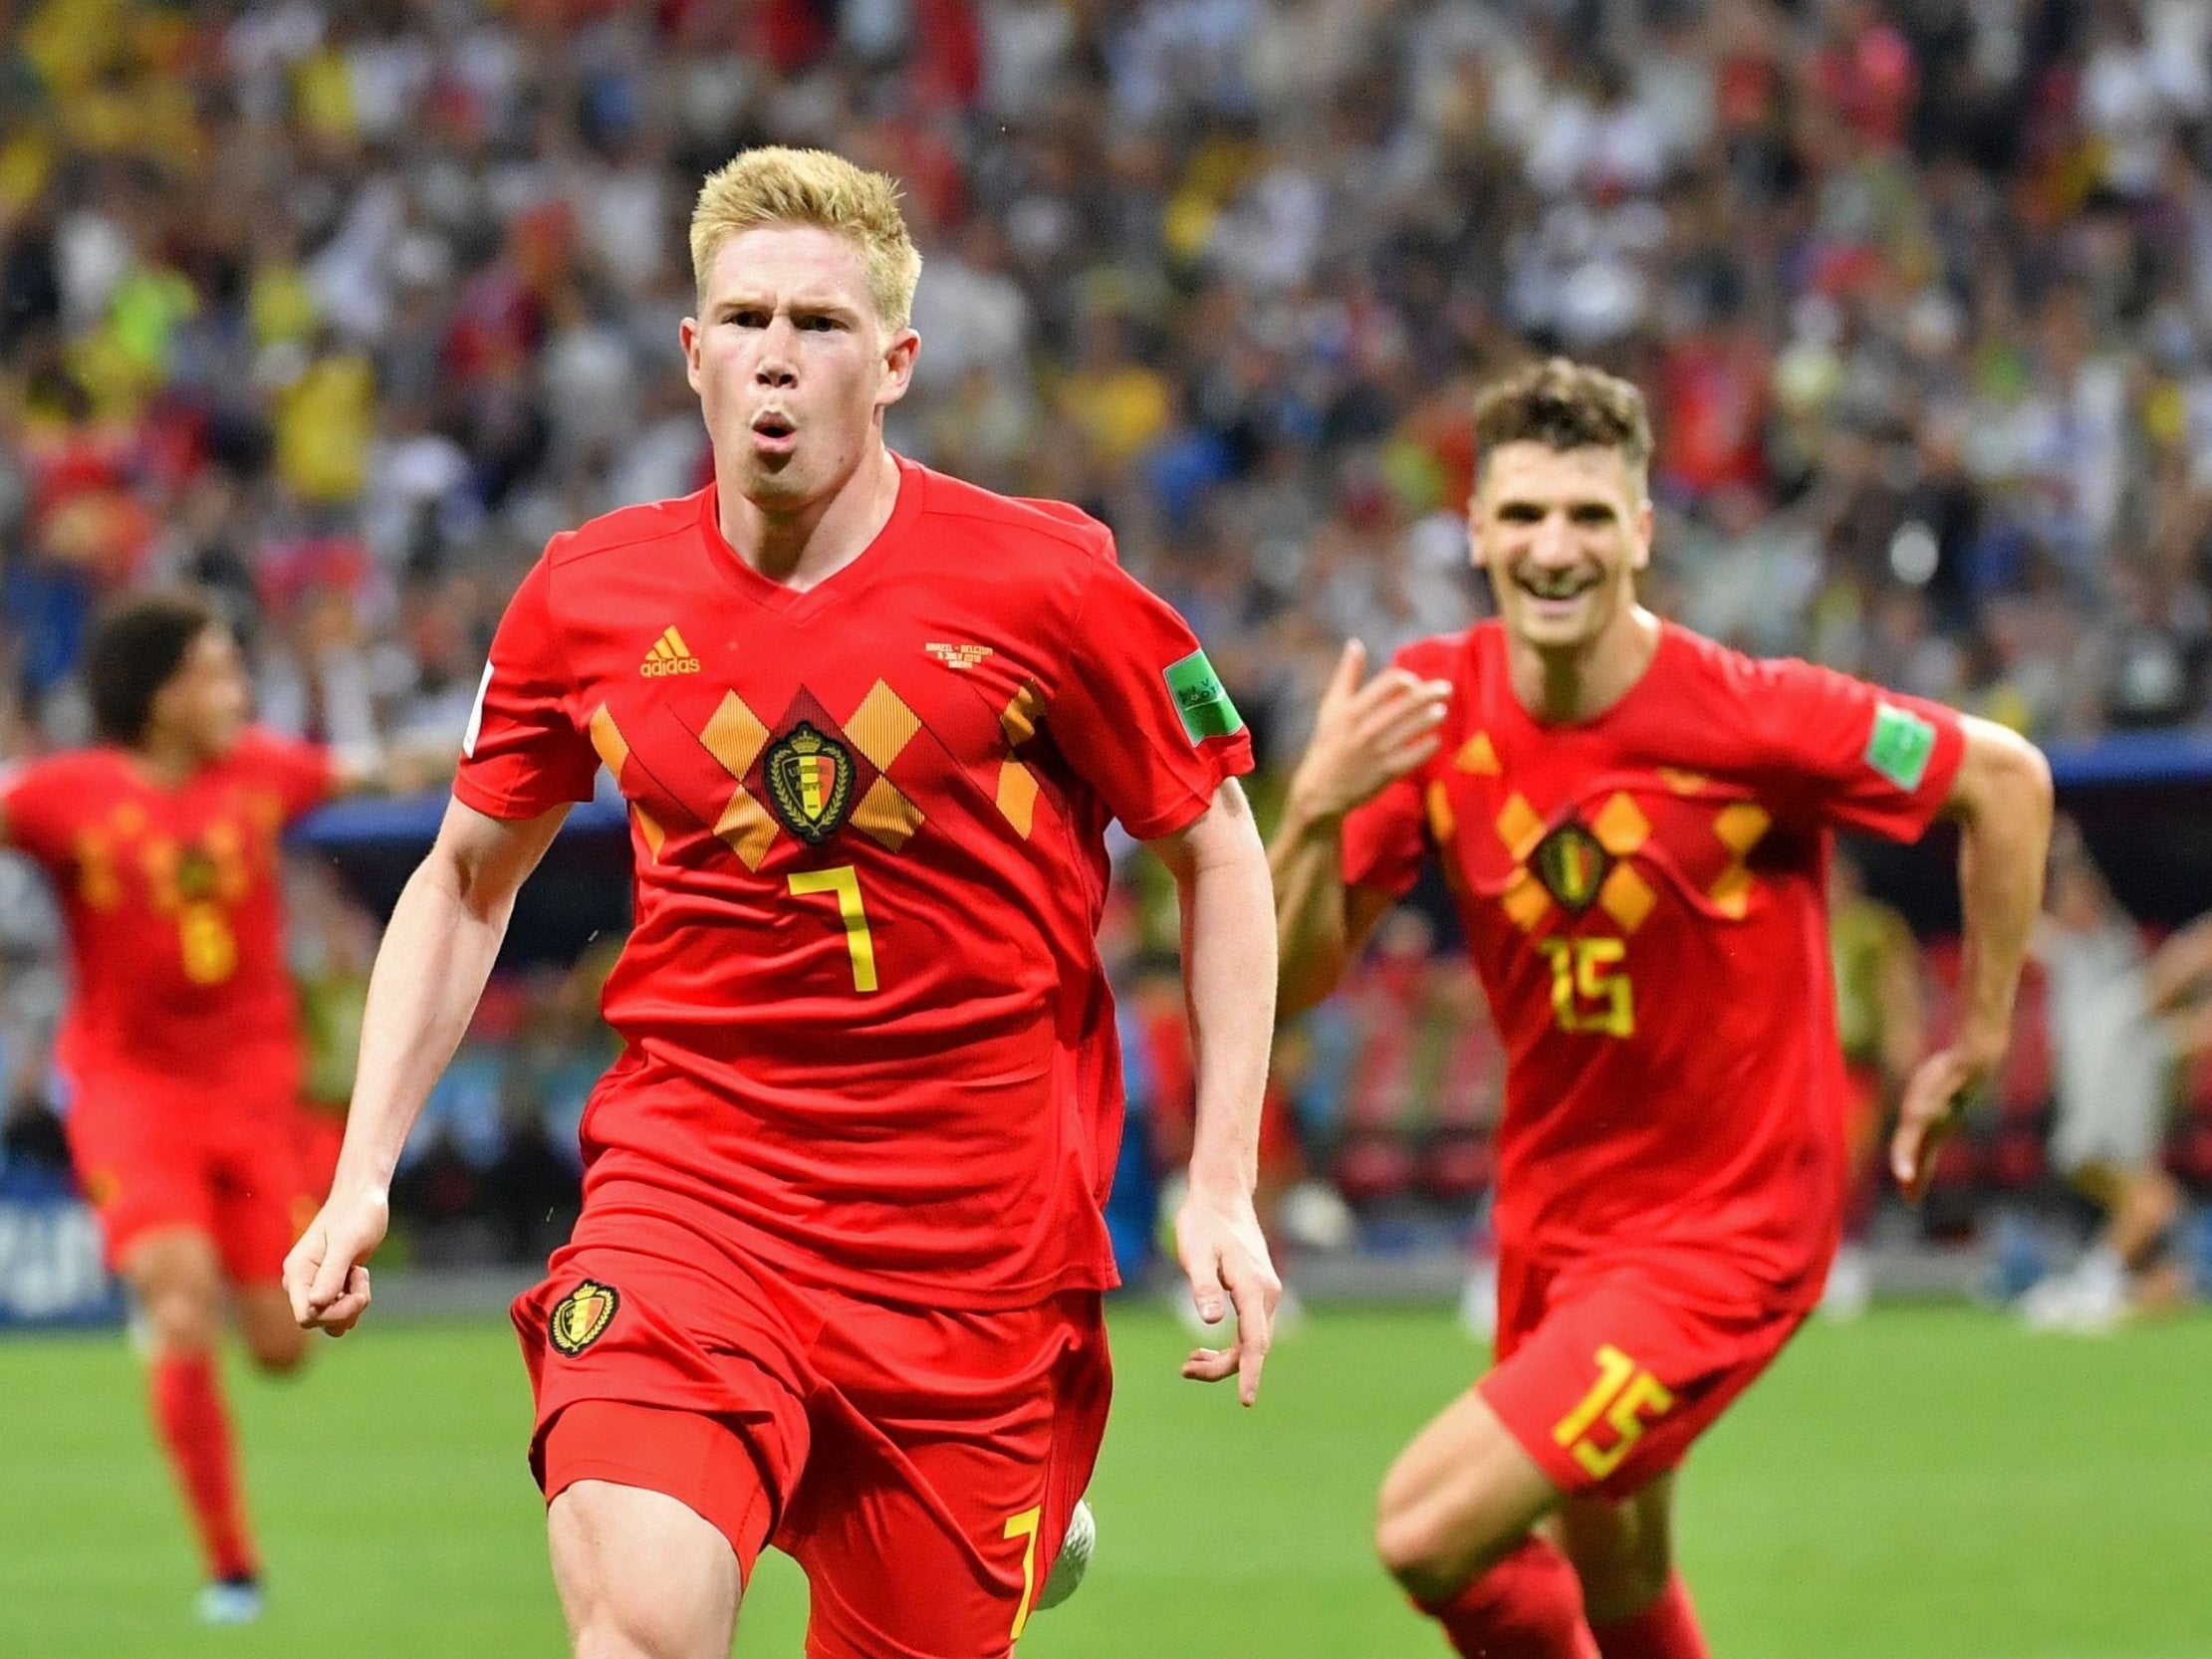 De Bruyne starred as Belgium saw off Brazil last time out